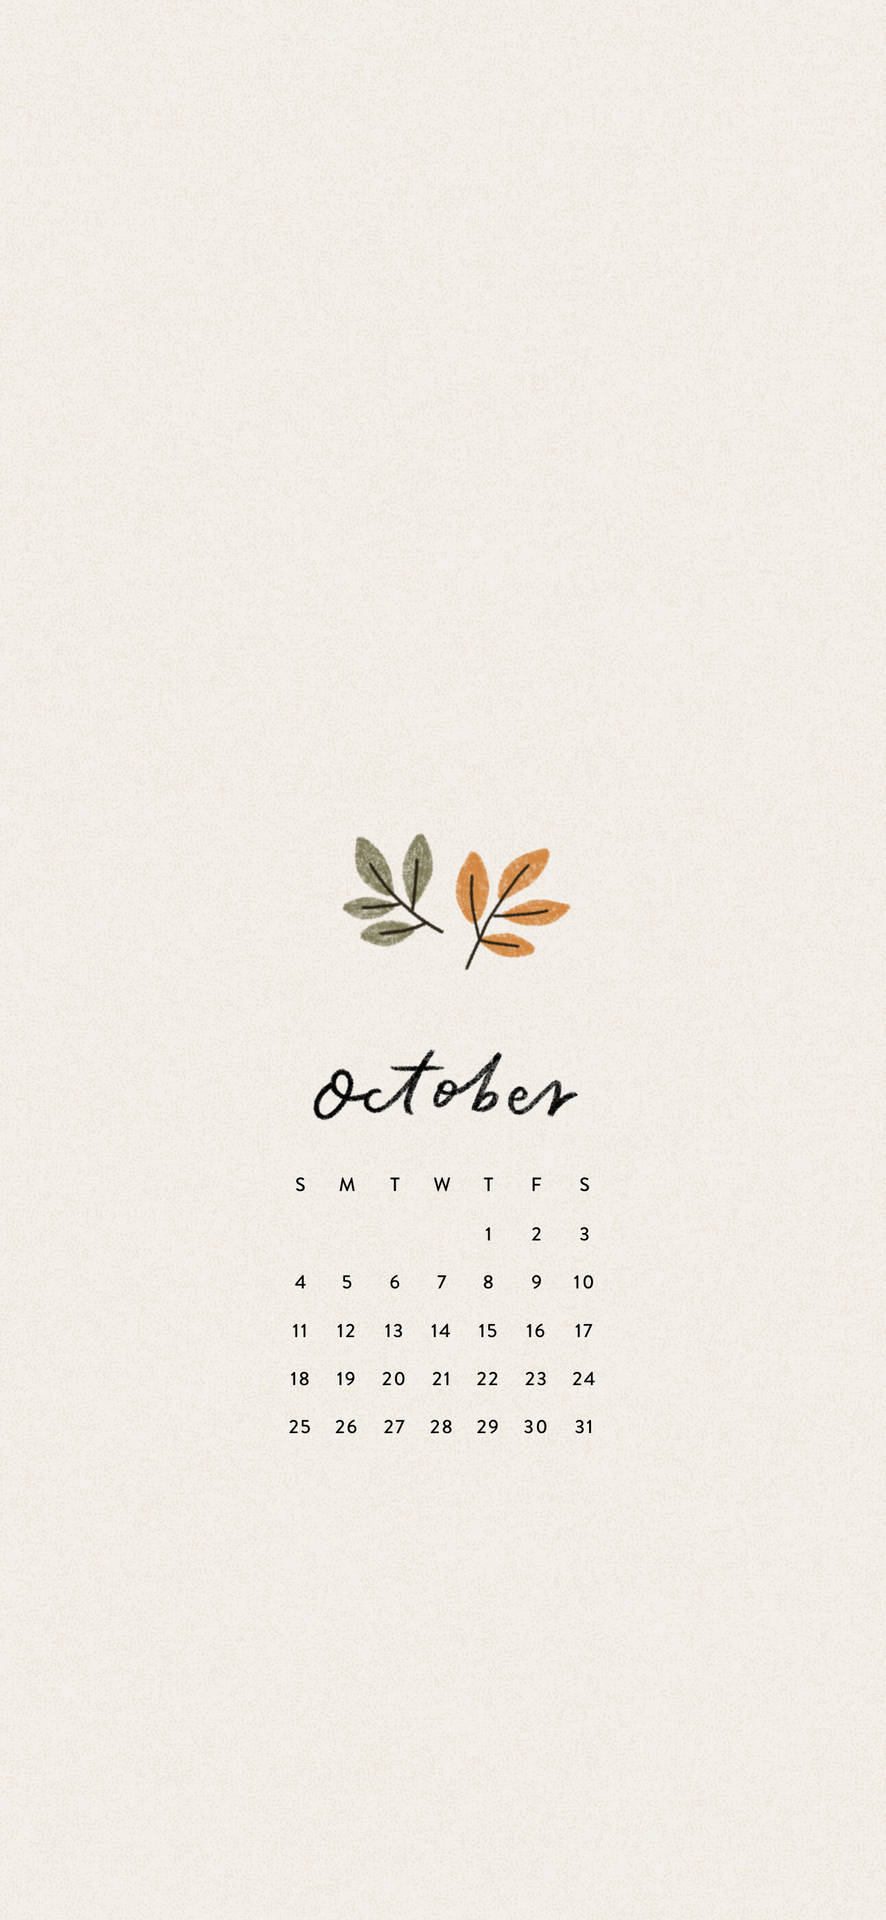 Countdown to the New Year with October 2020 Calendar Wallpaper